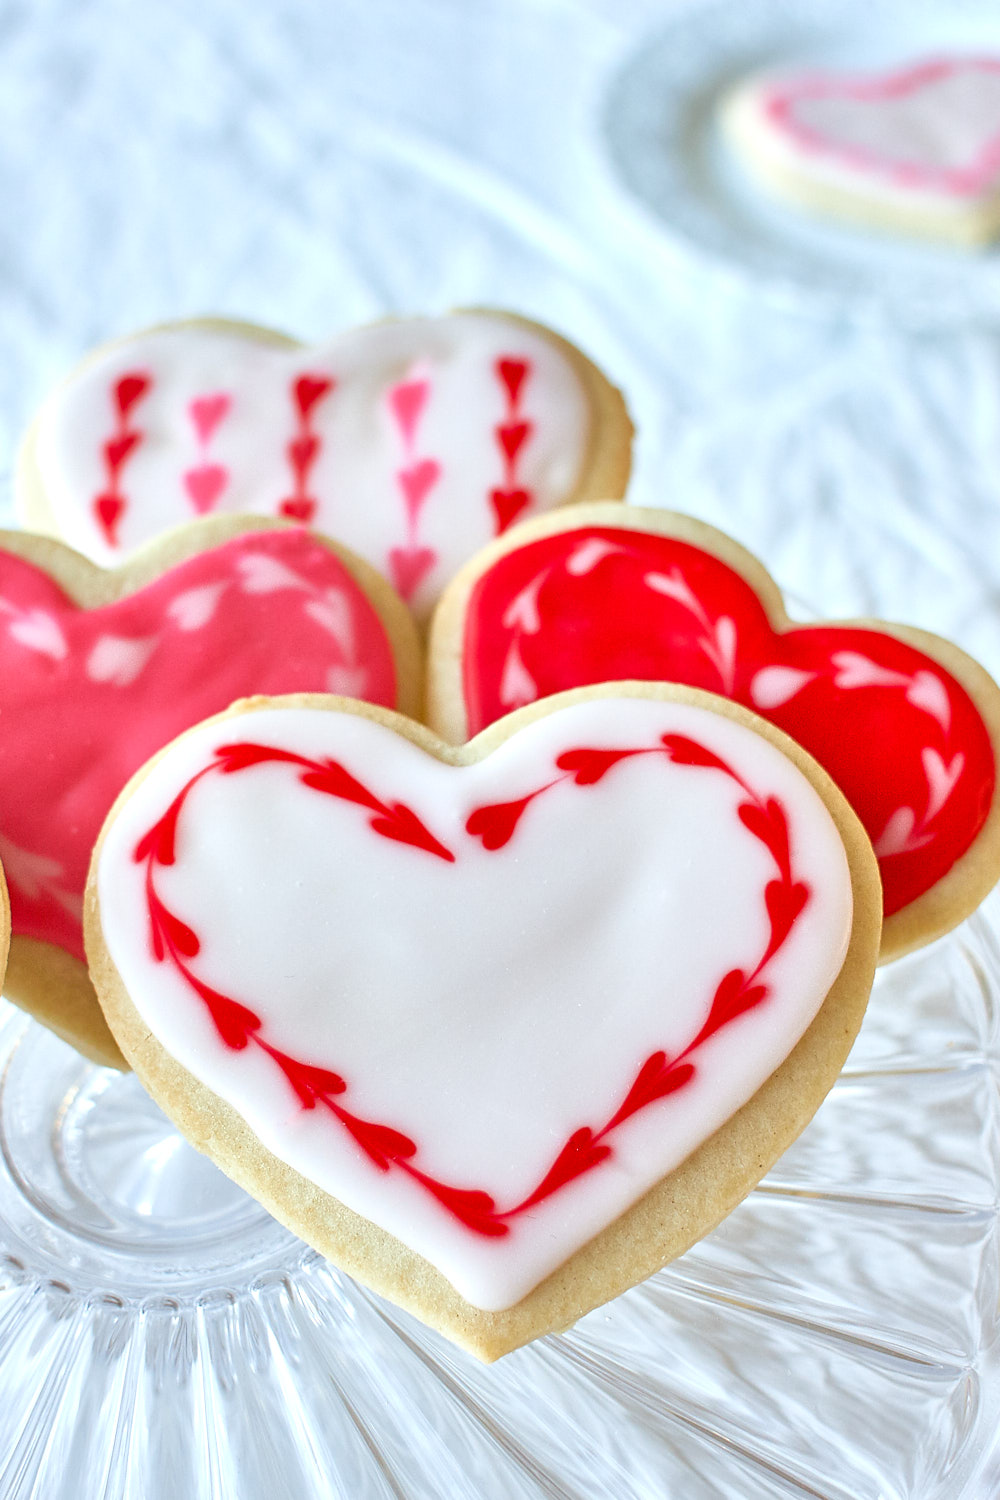 Red and white heart shaped sugar cookies on a plate